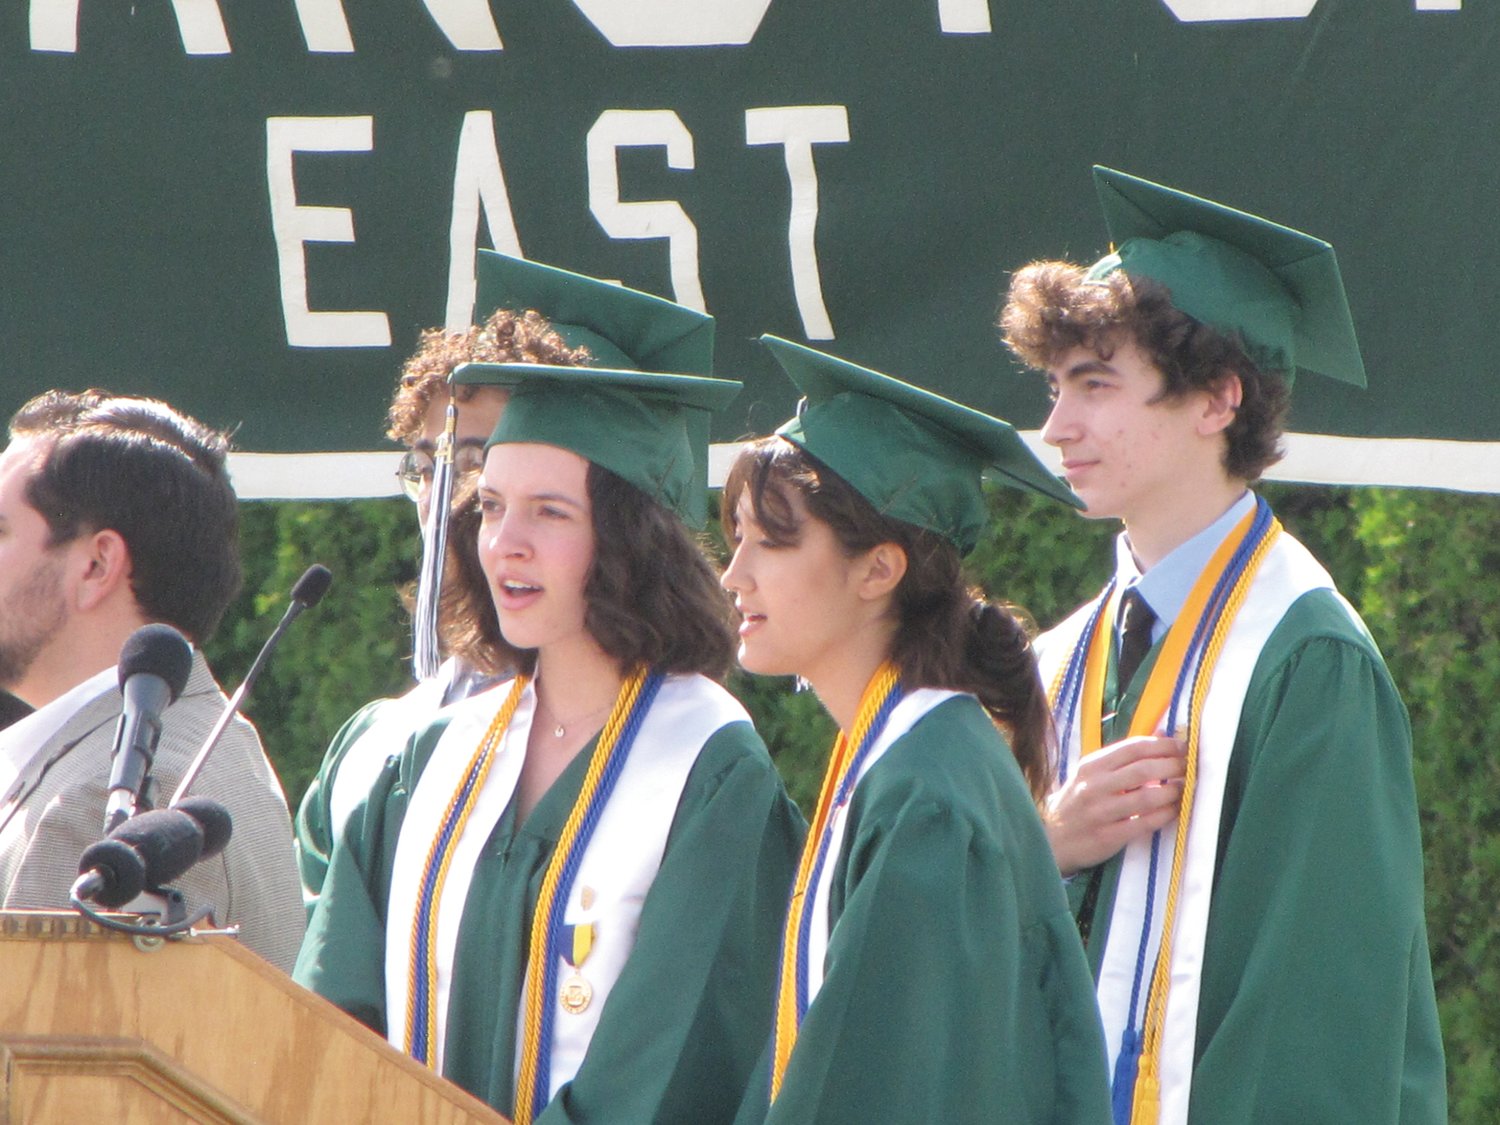 SINGING THE ANTHEM: Cranston East Choir members Mina Grady and Aislinn Baxter perform the national anthem at the start of Saturday’s commencement exercises.